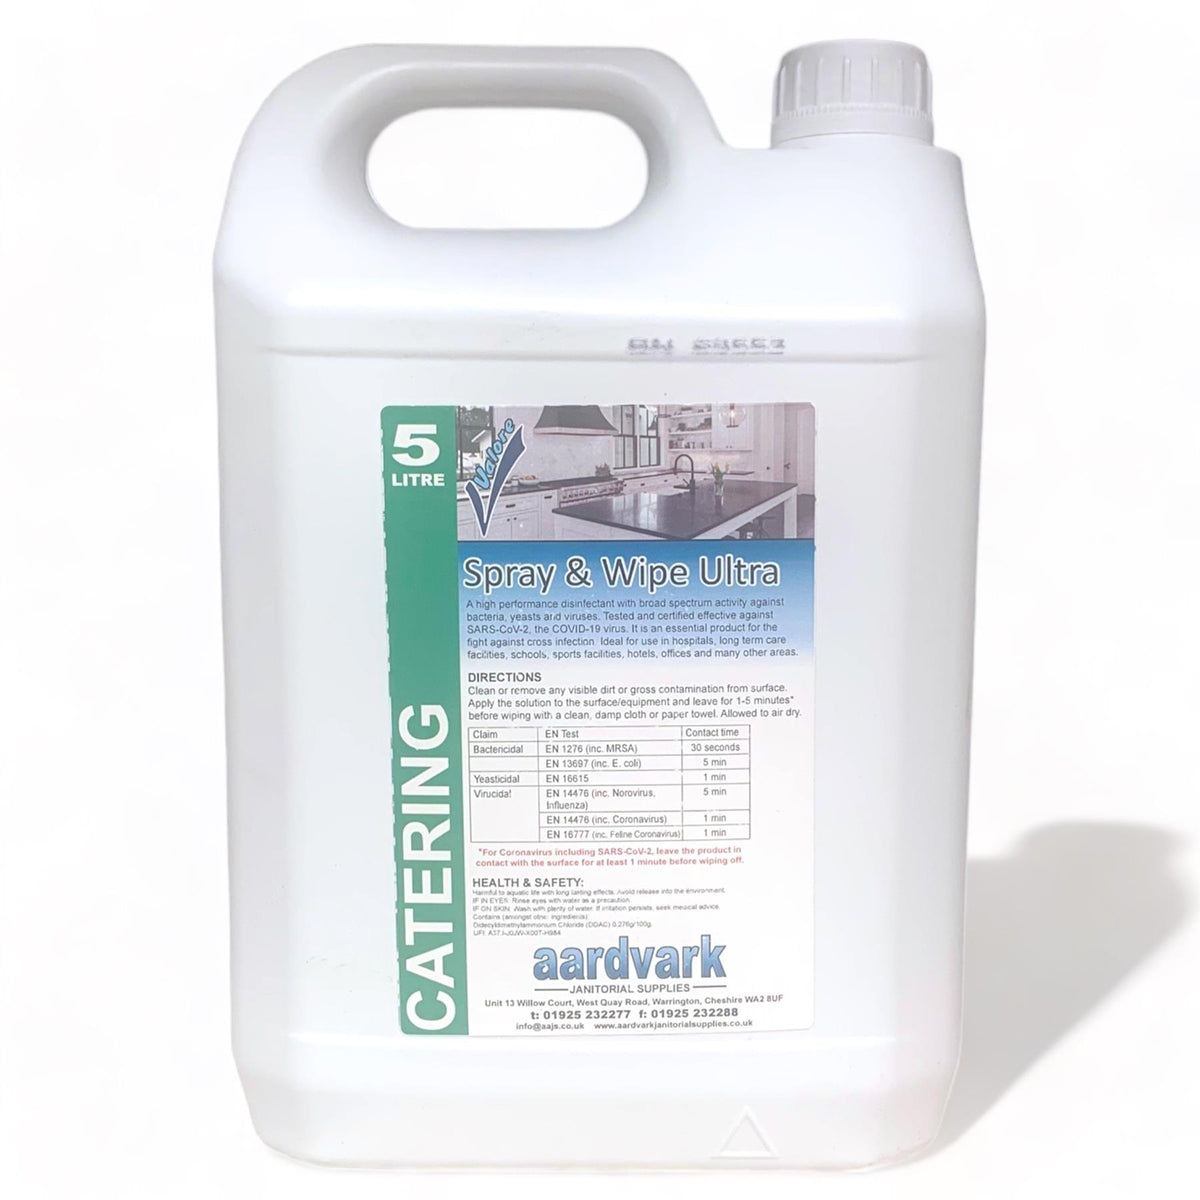 Aardvark Janitorial Supplies Spray and Wipe Ultra Bactericidal and Viricidal Cleaner 5 Litre